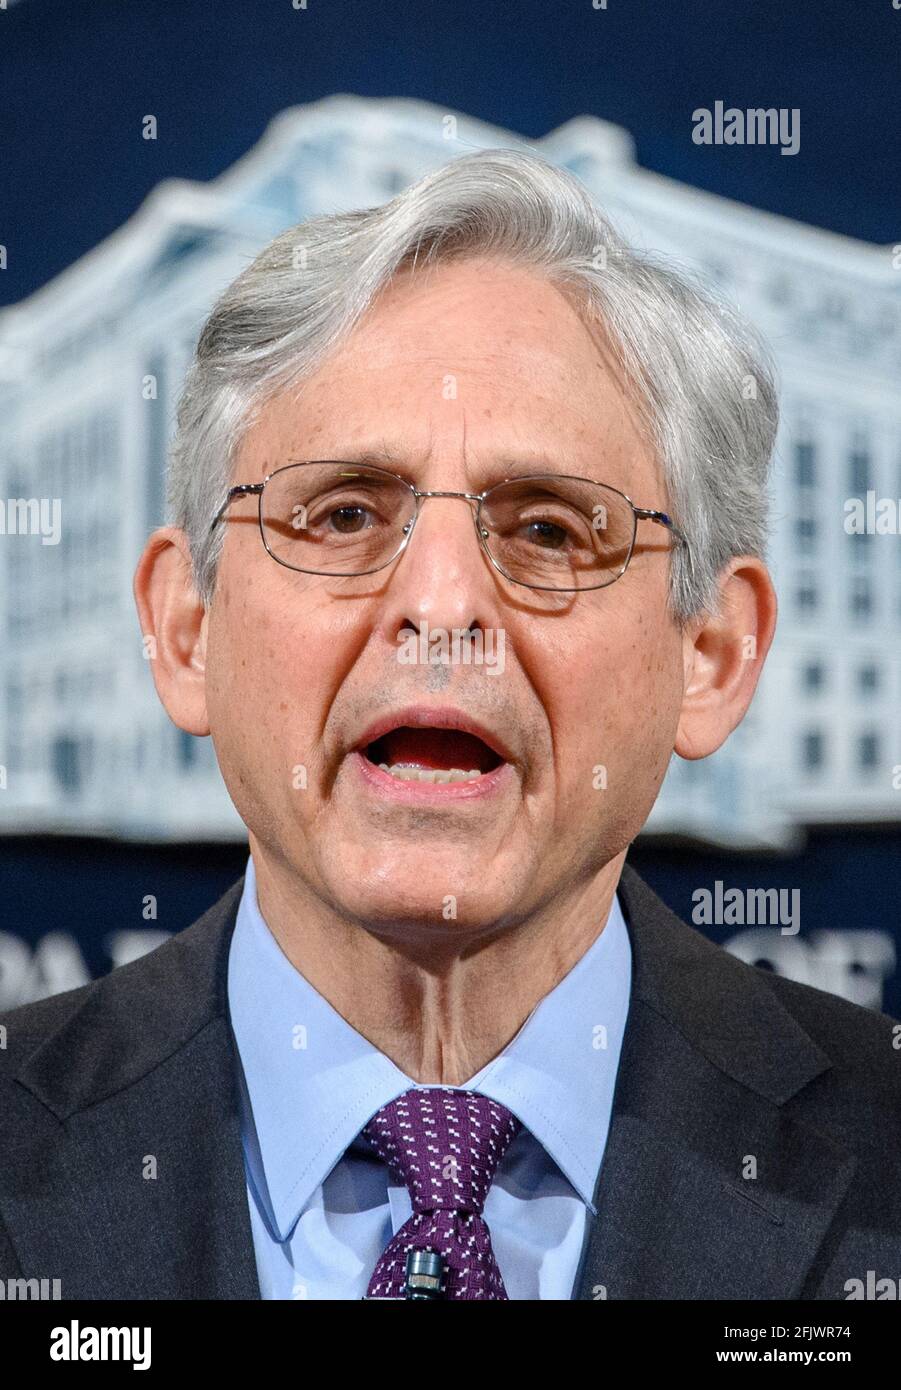 Washington, United States. 26th Apr, 2021. U.S. Attorney General Merrick Garland delivers a statement at the Department of Justice in Washington, DC on Monday, April 26, 2021. Garland announced that the Justice Department will open a civil investigation into the Louisville Metro Police Department. Pool Photo by Mandel Ngan/UPI Credit: UPI/Alamy Live News Stock Photo